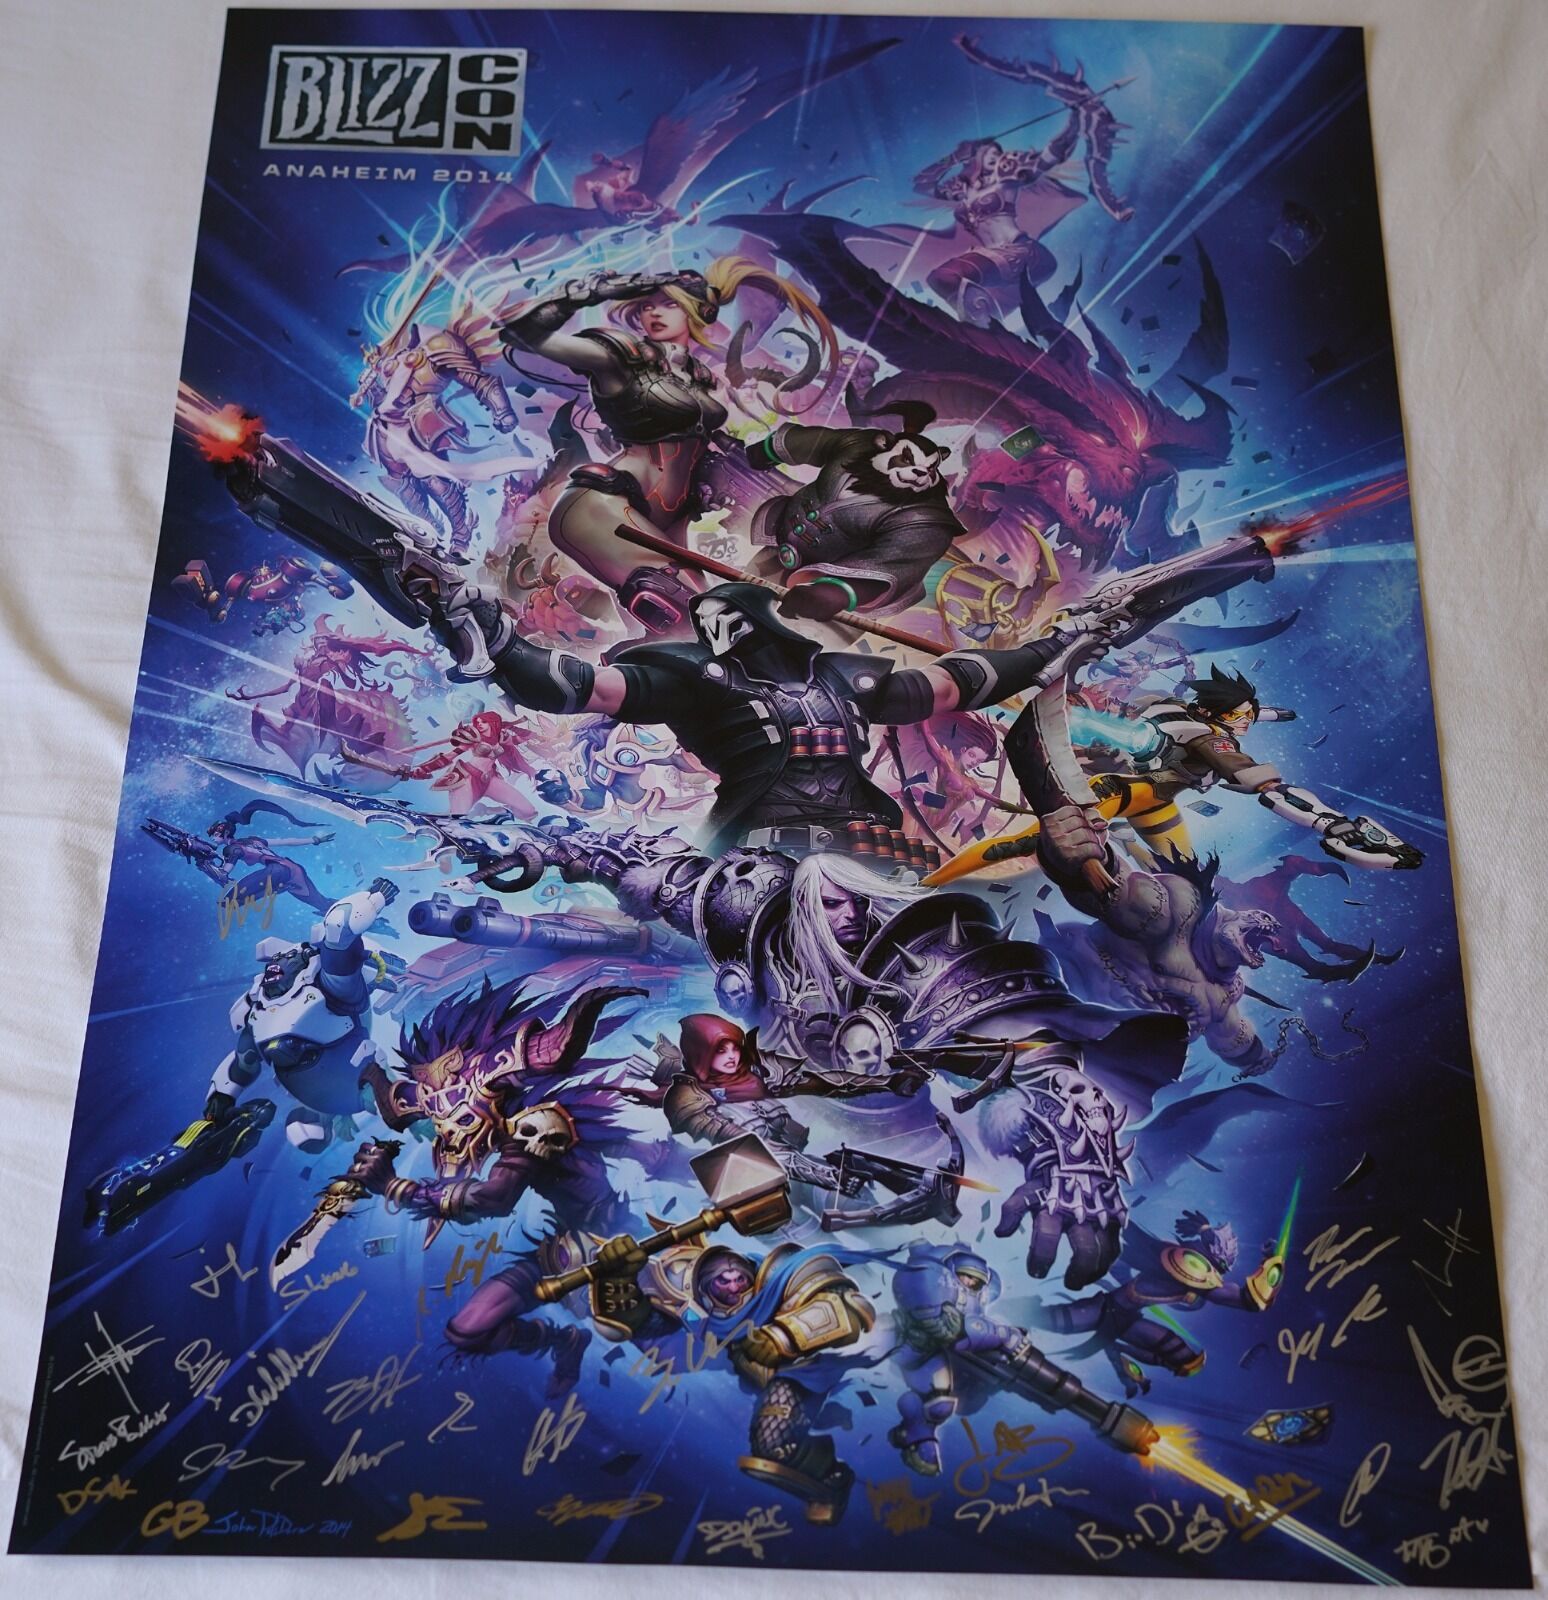 Blizzcon 2014 Exclusive Wholesale Key Art Poster Limited price Signed